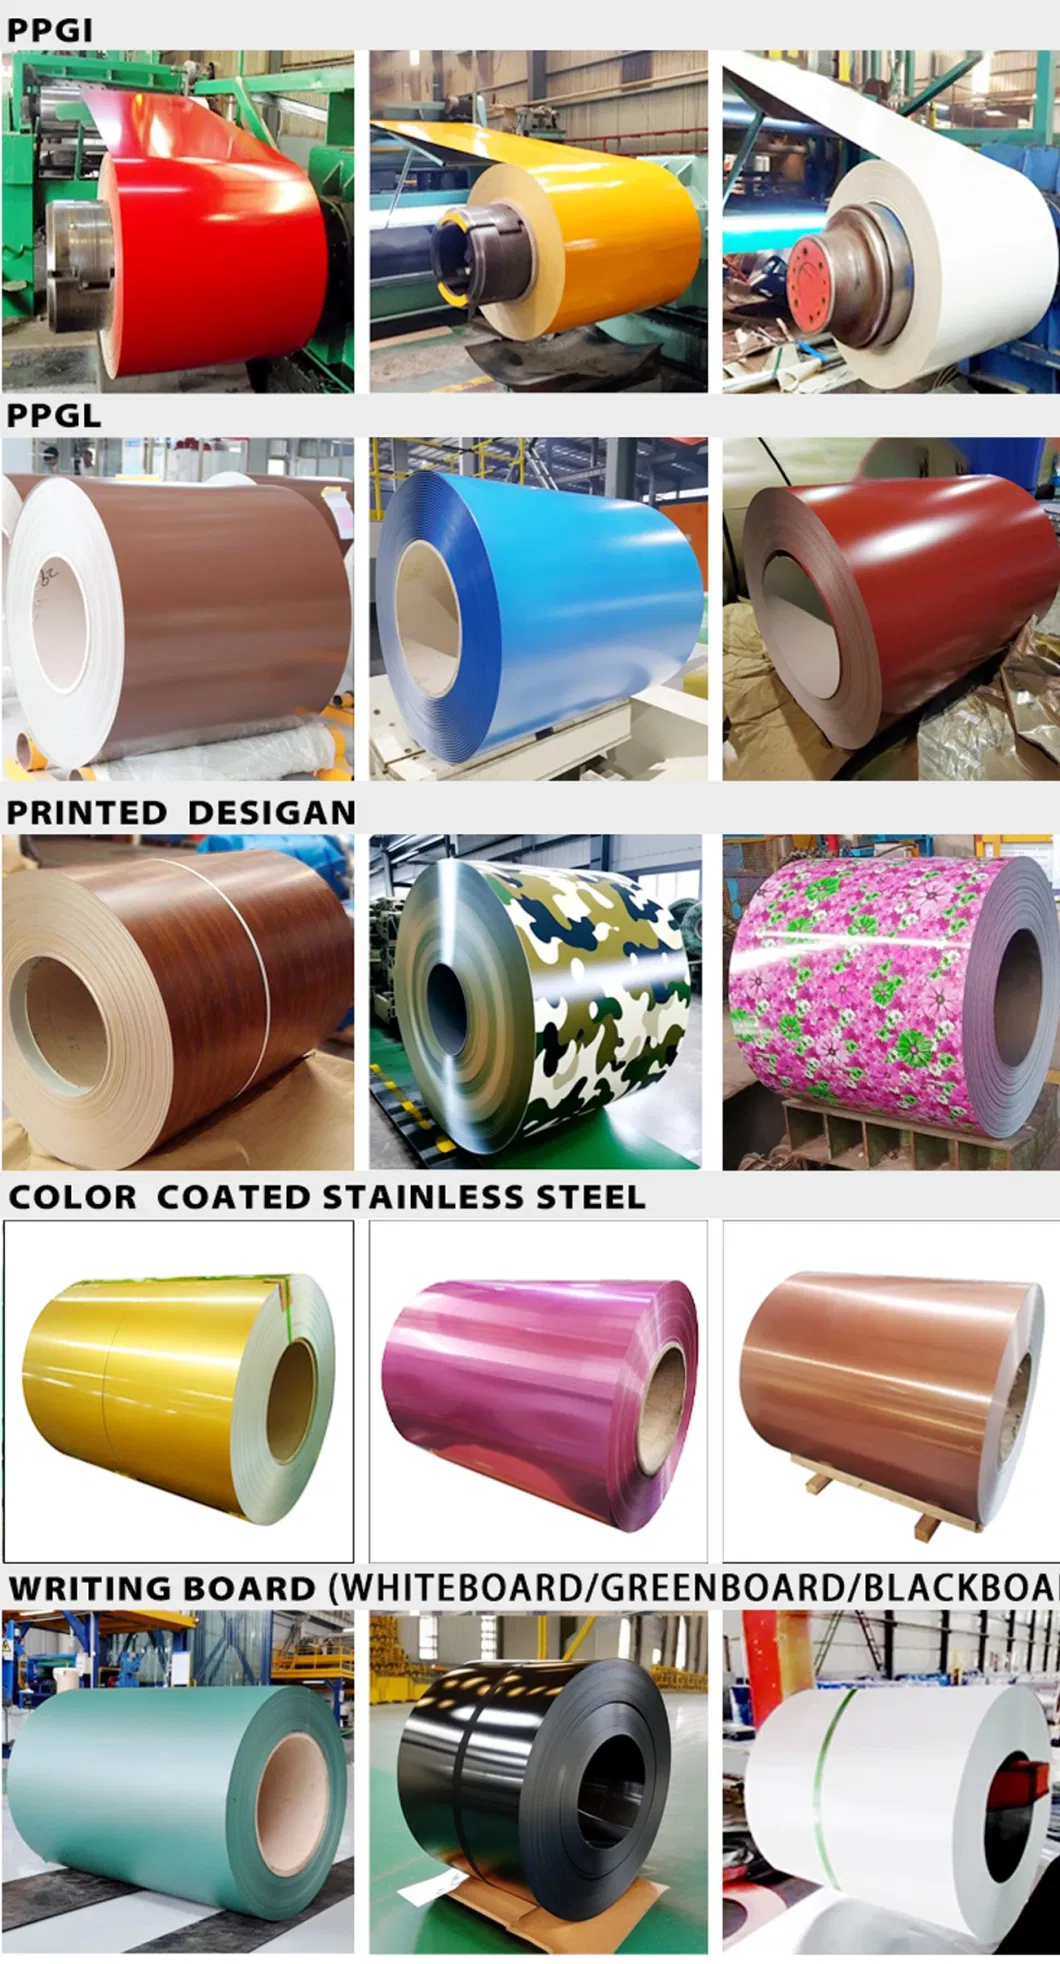 Durable Pre-Painted Steel Material Construction Steel with Custom Color Options